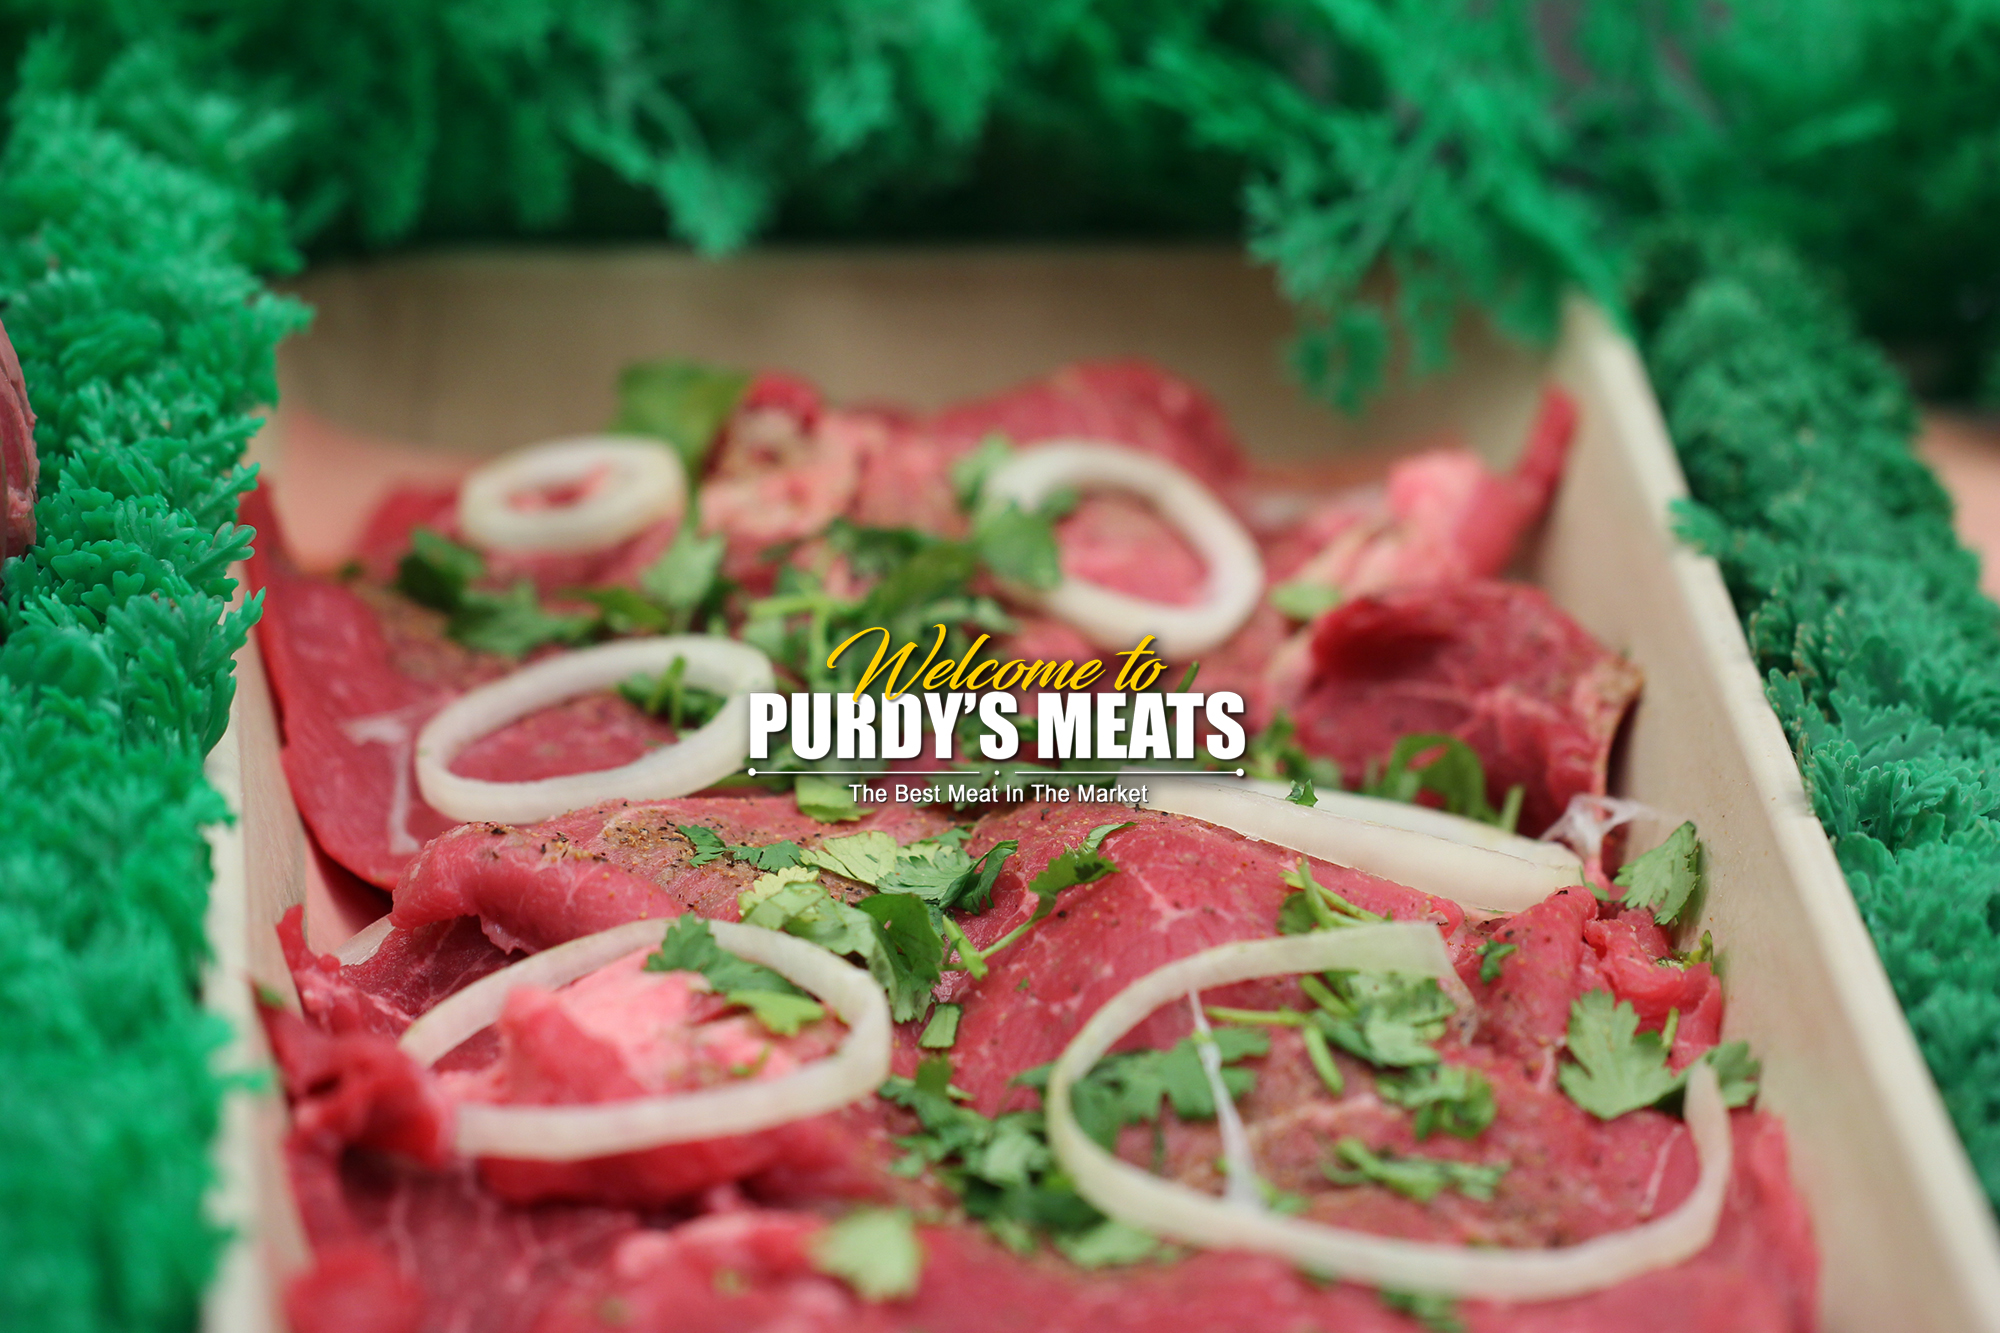 This banner image shows the Carne Asada Meat Product of the Purdy's Quality Meats